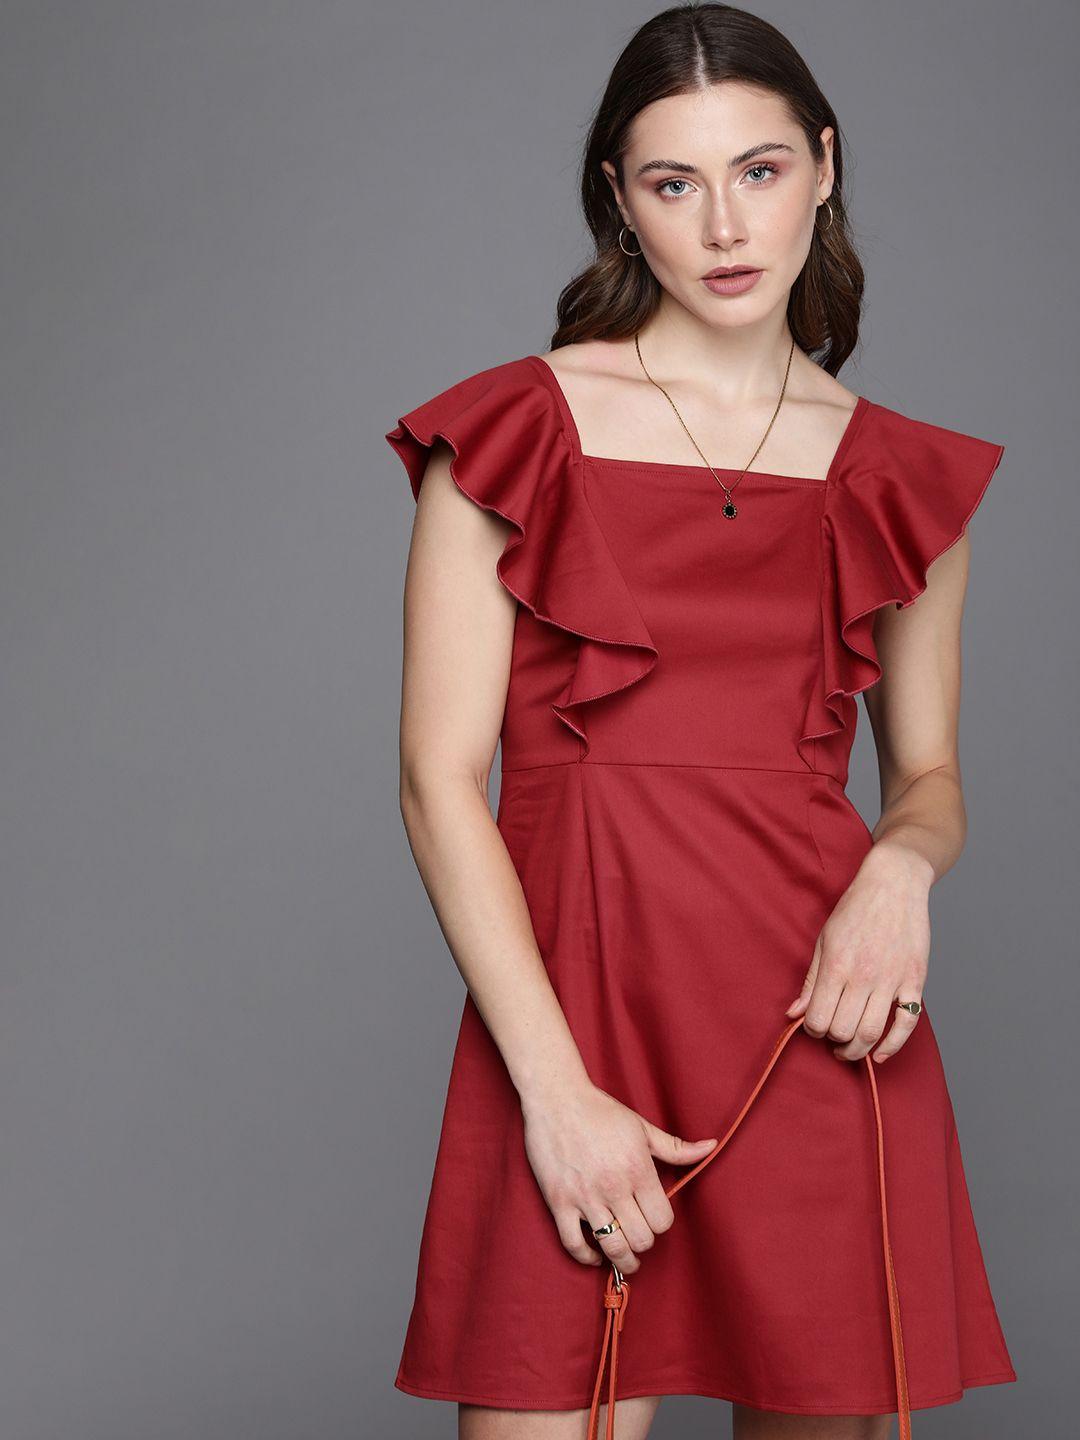 kenneth cole vivacious women rust red satin finish flutter sleeve ruffled a-line dress